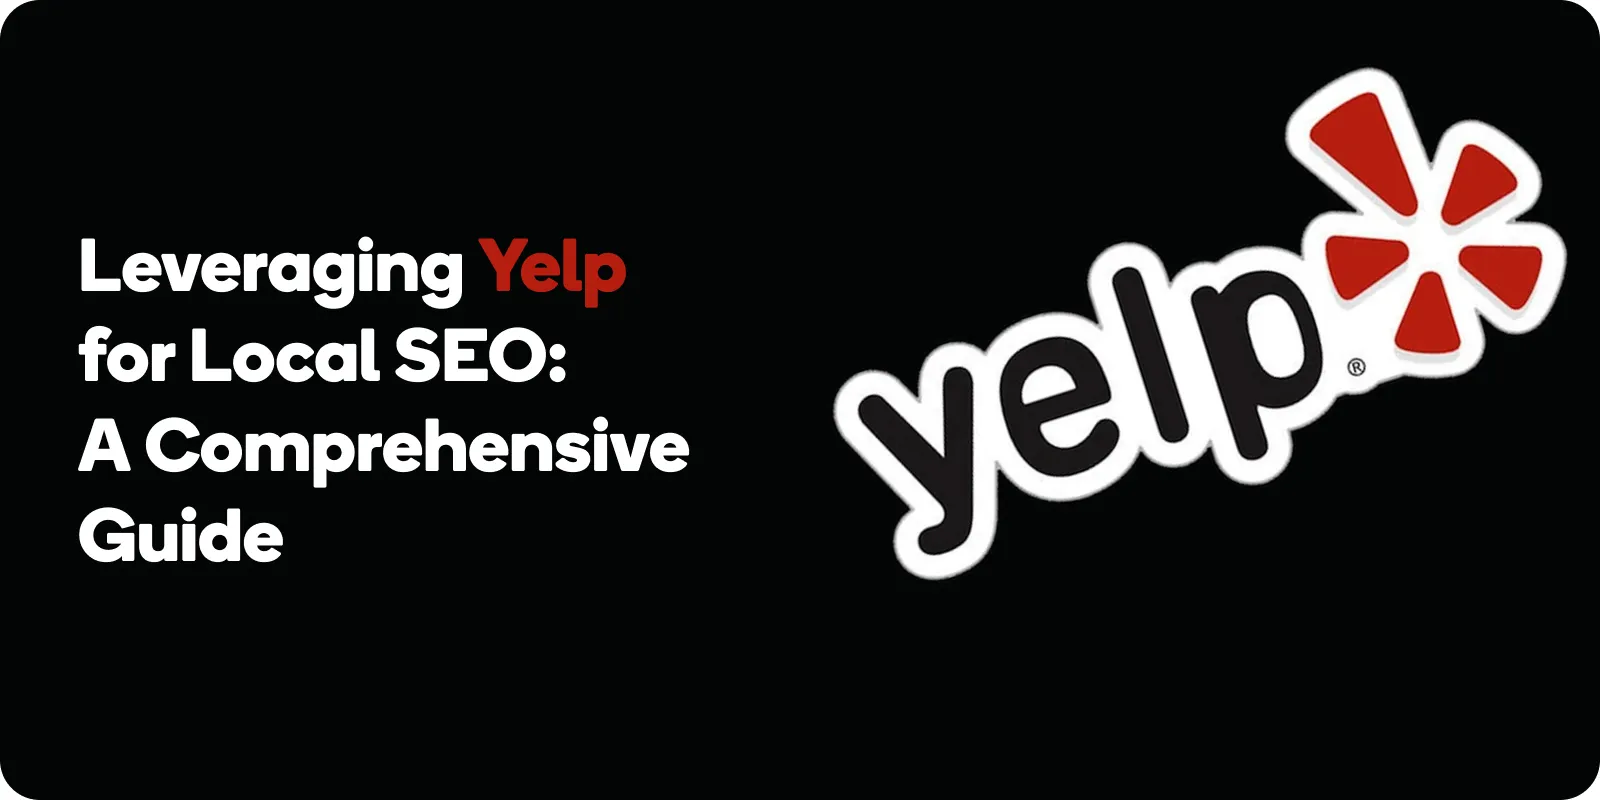 Leveraging-Yelp-for-Local-SEO-A-Comprehensive-Guide